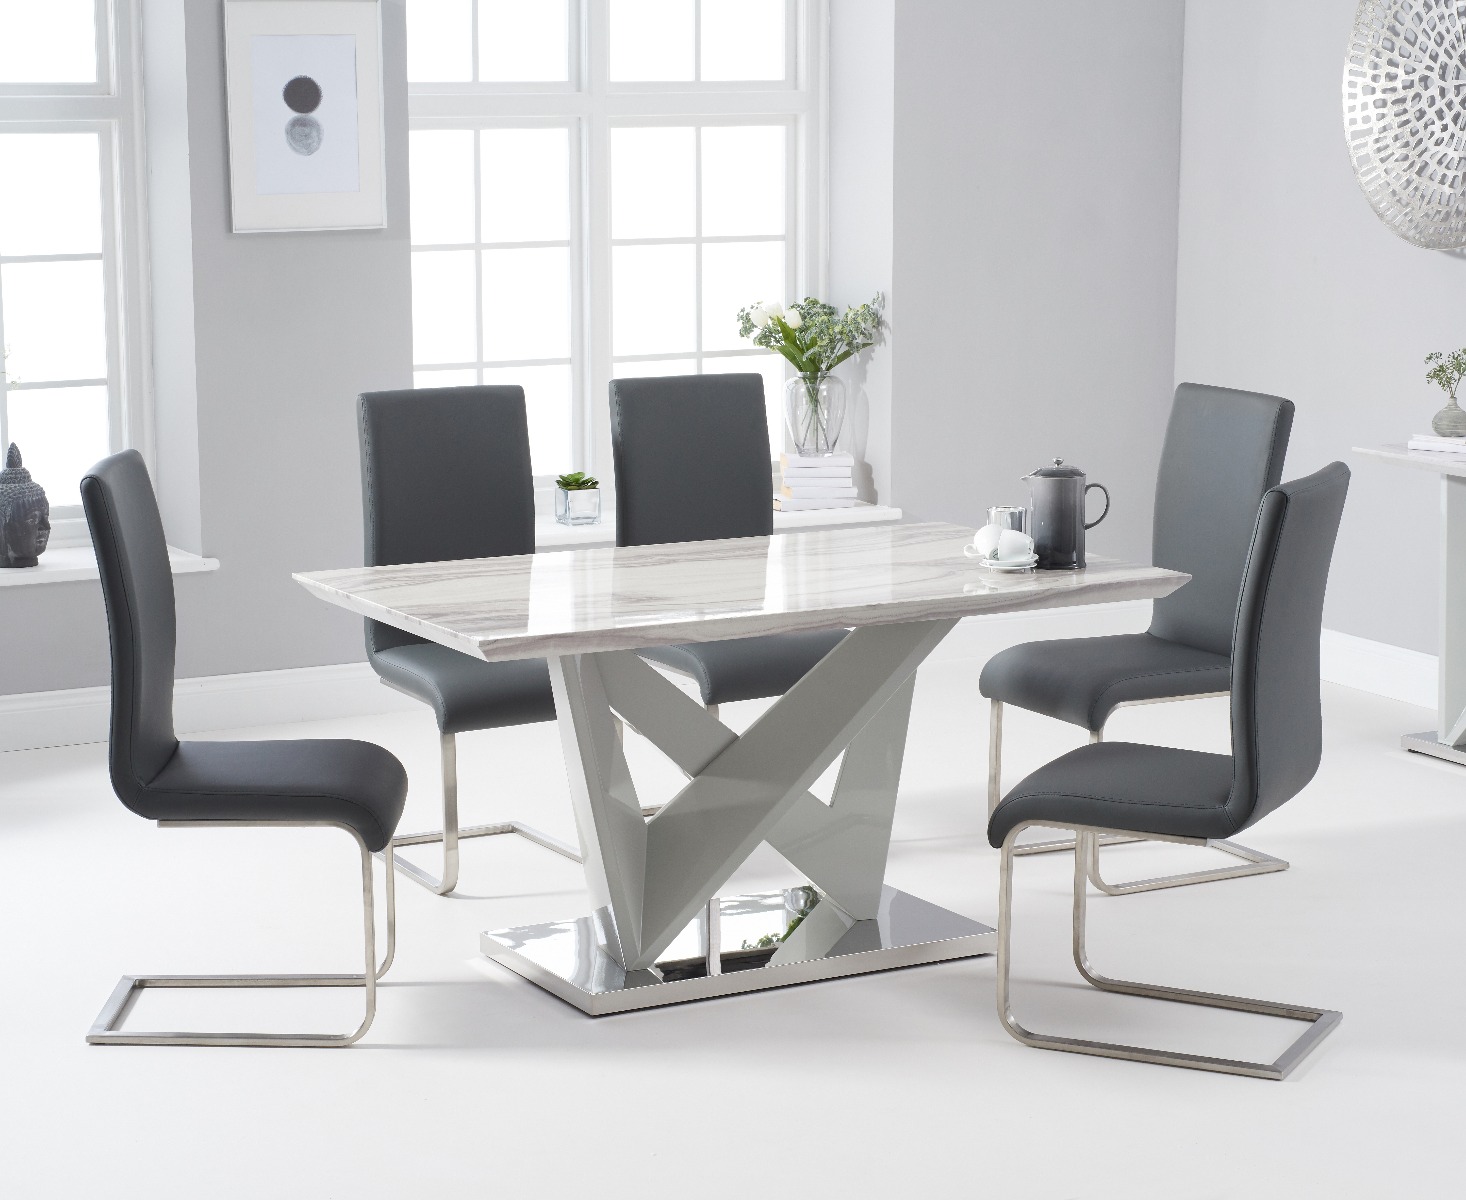 Reims 150cm Marble Effect Carrera Light Grey Dining Table With 6 Grey Malaga Dining Chairs